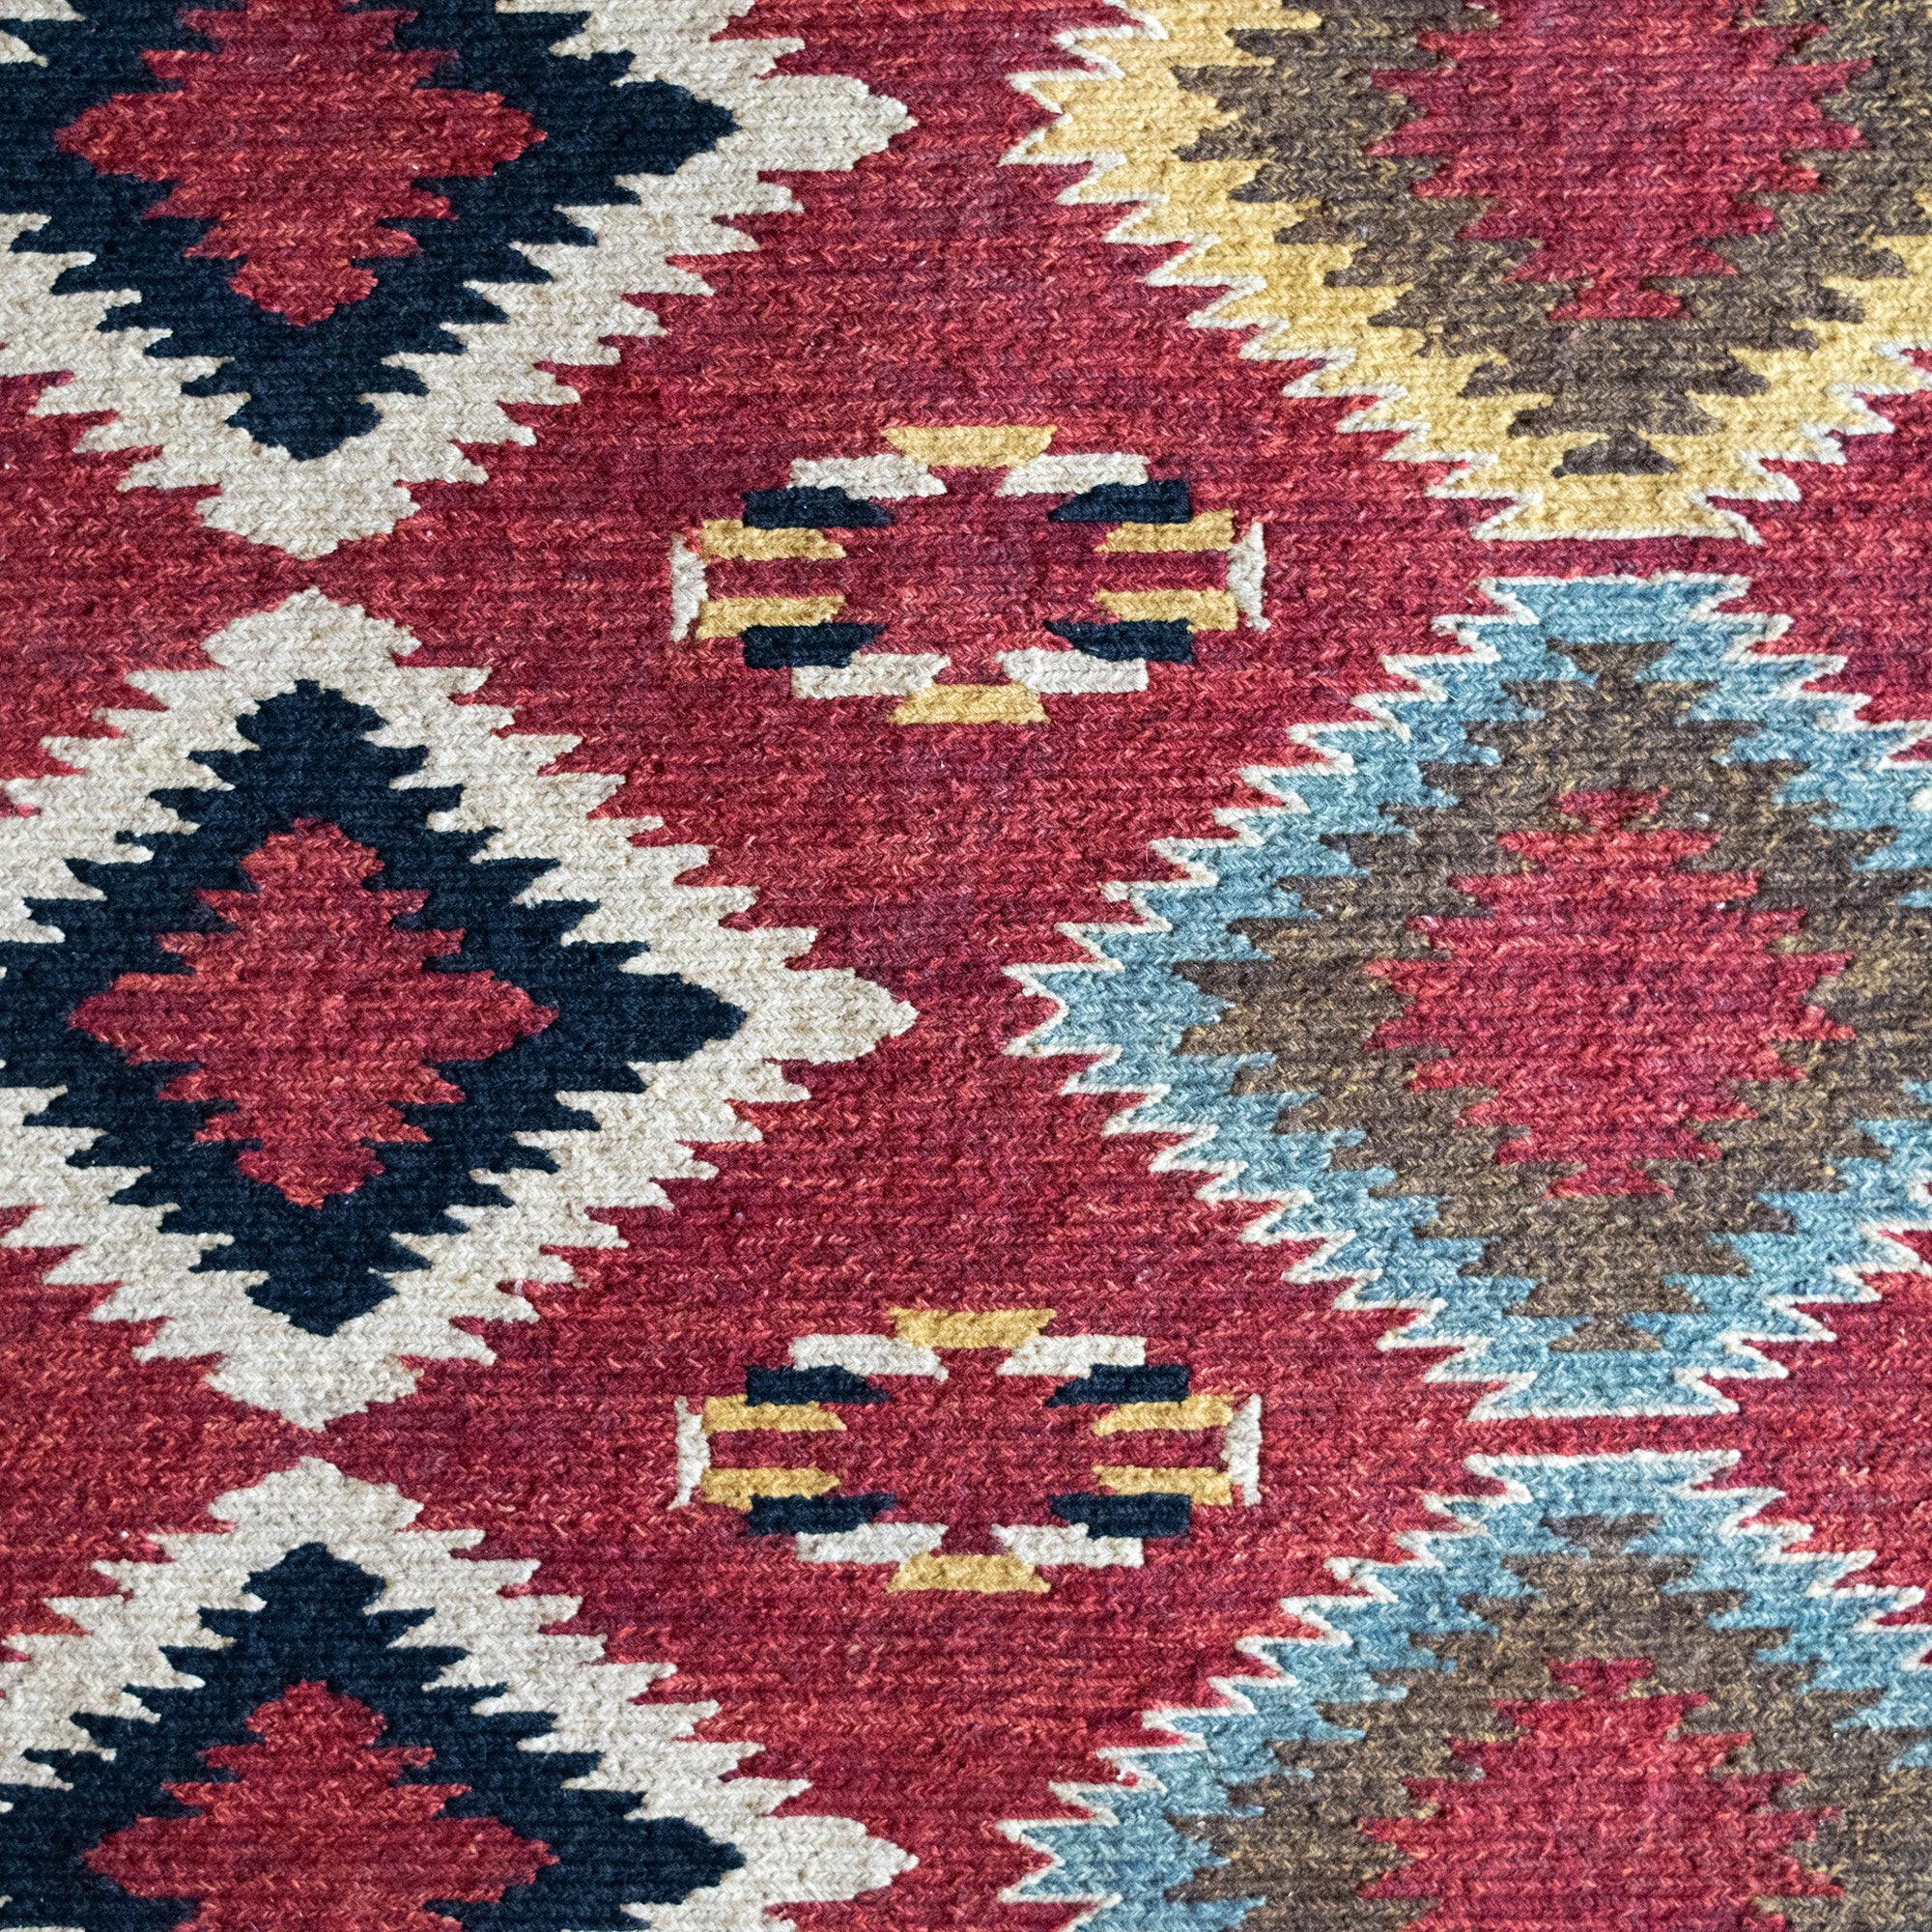 Hand Woven Sumak Wool Rug  Red, Black, and Ivory Sumak Wool and